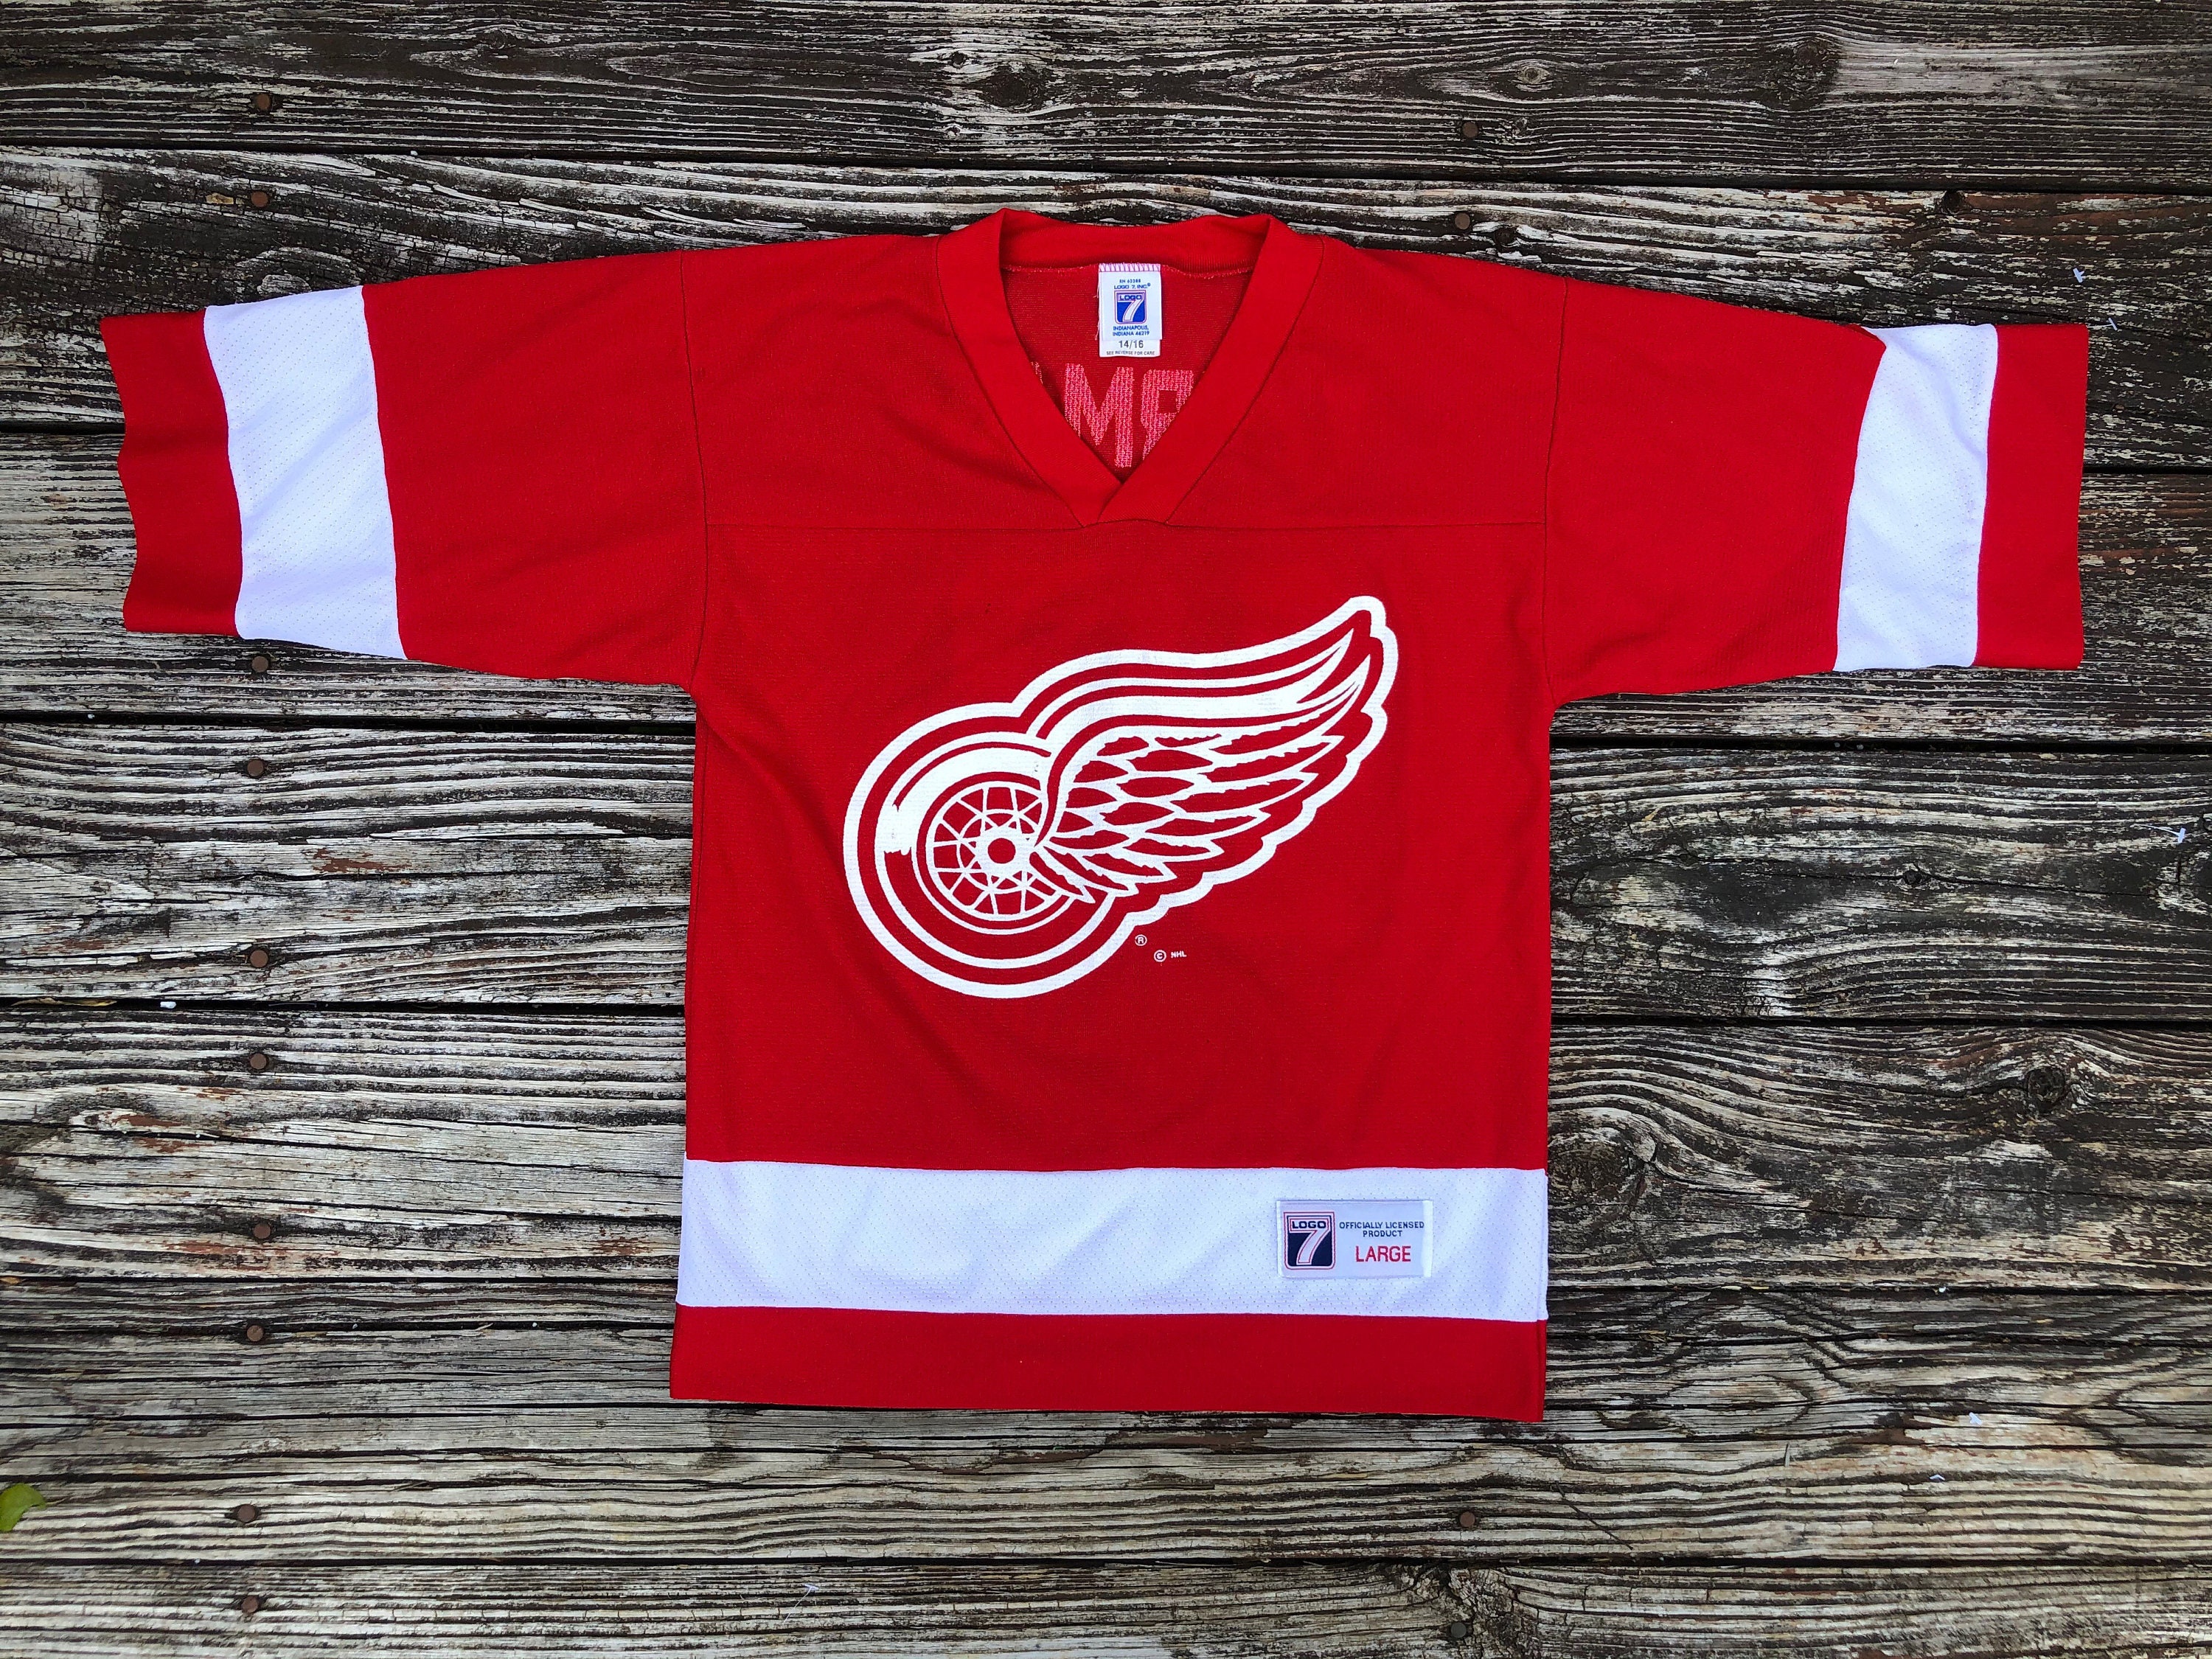 Detroit Red Wings Vintage 90s Starter Hockey Jersey White and Red Uniform  Shirt Men's by NHL Licensed Product